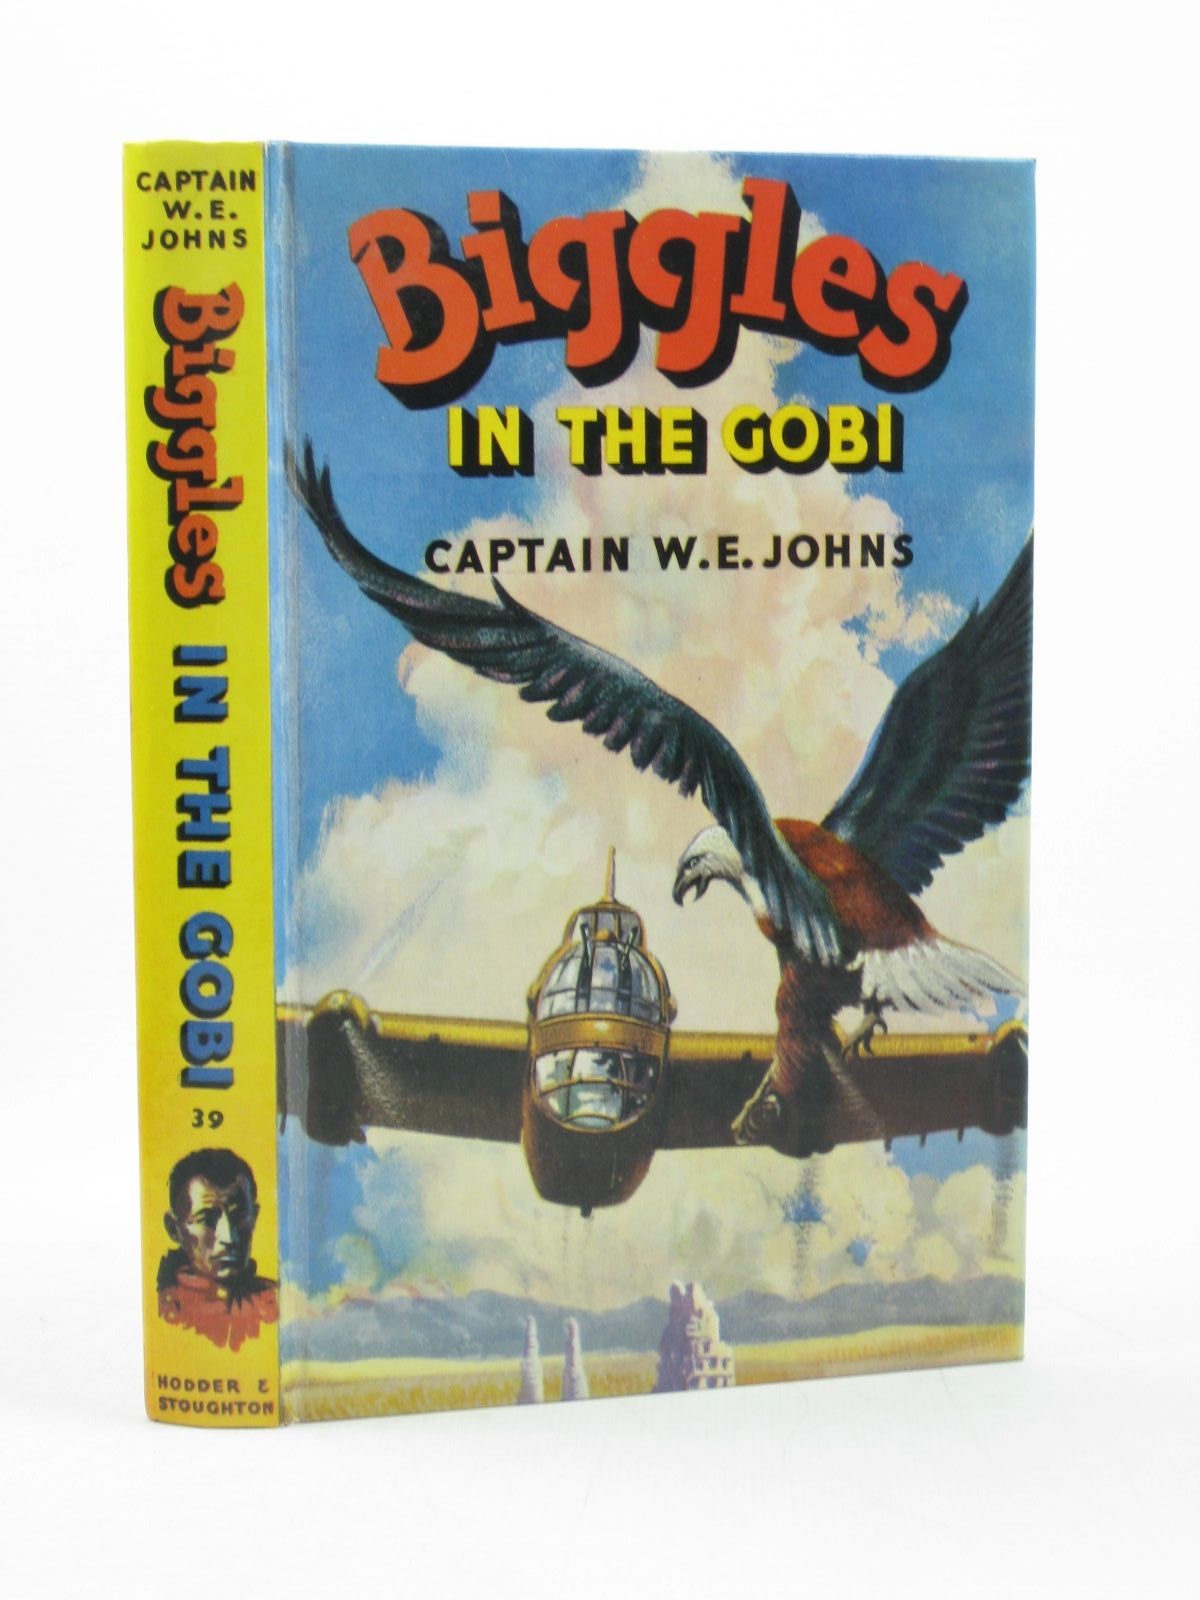 Cover of BIGGLES IN THE GOBI by W.E. Johns